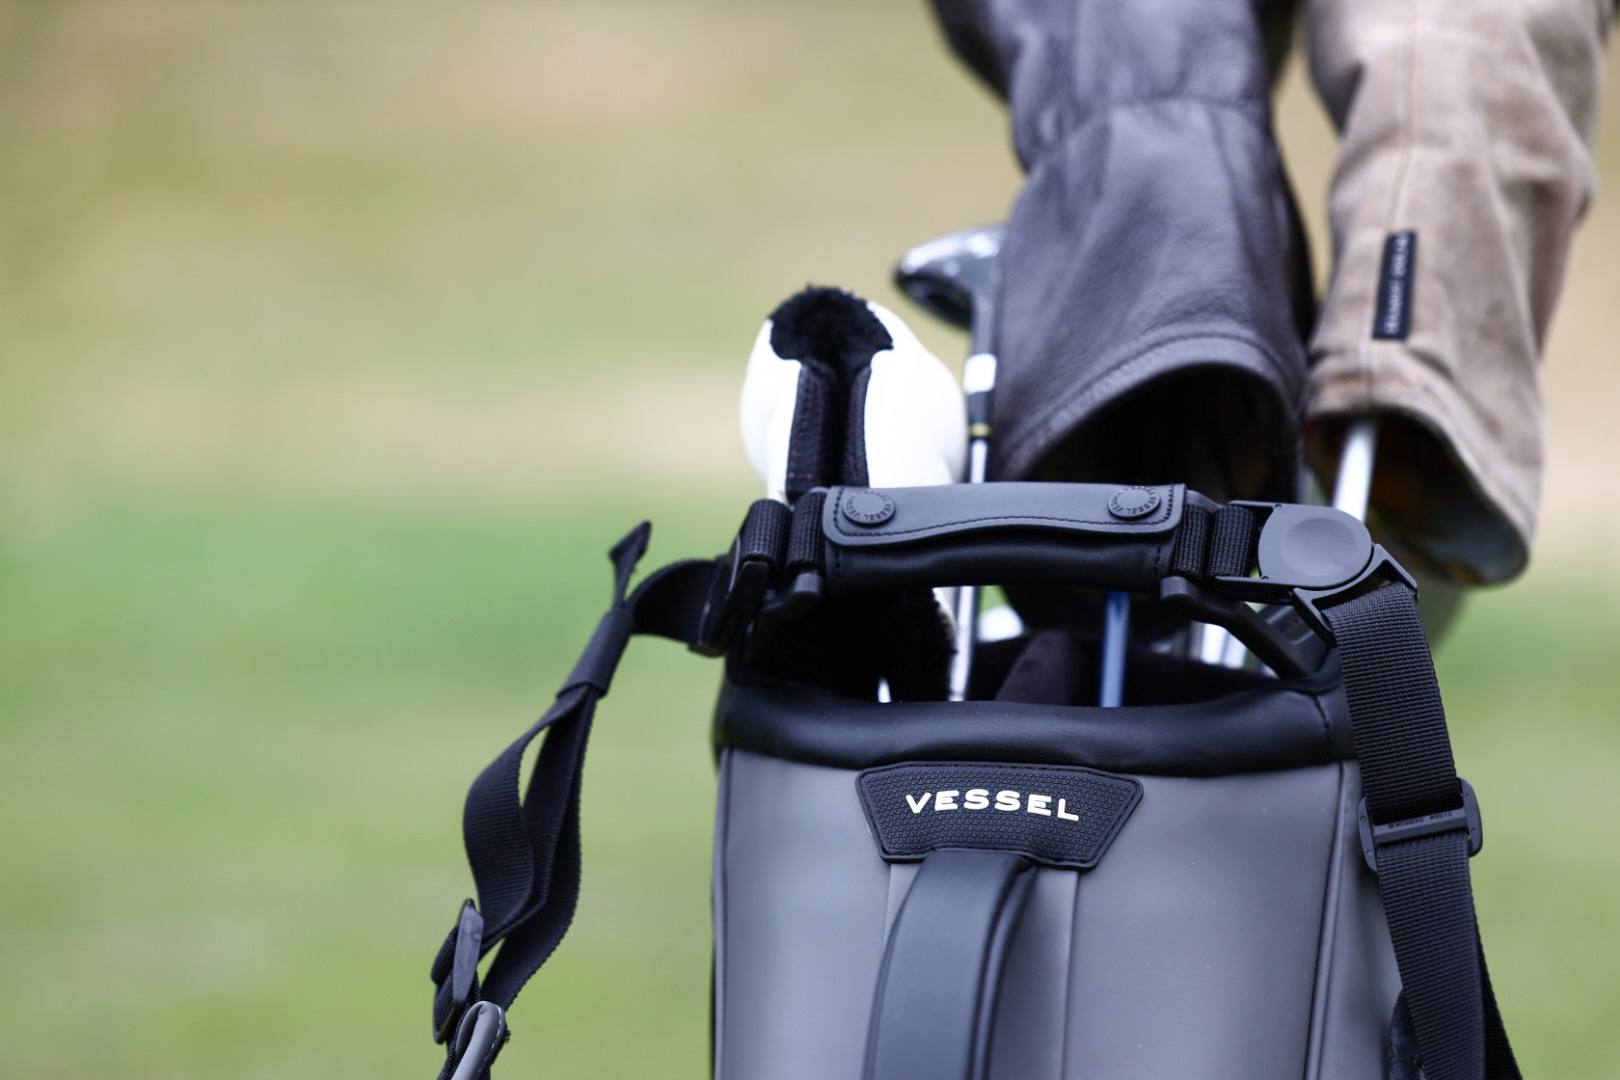 Vessel Player III Review: The Sexiest Golf Bag on the Market?